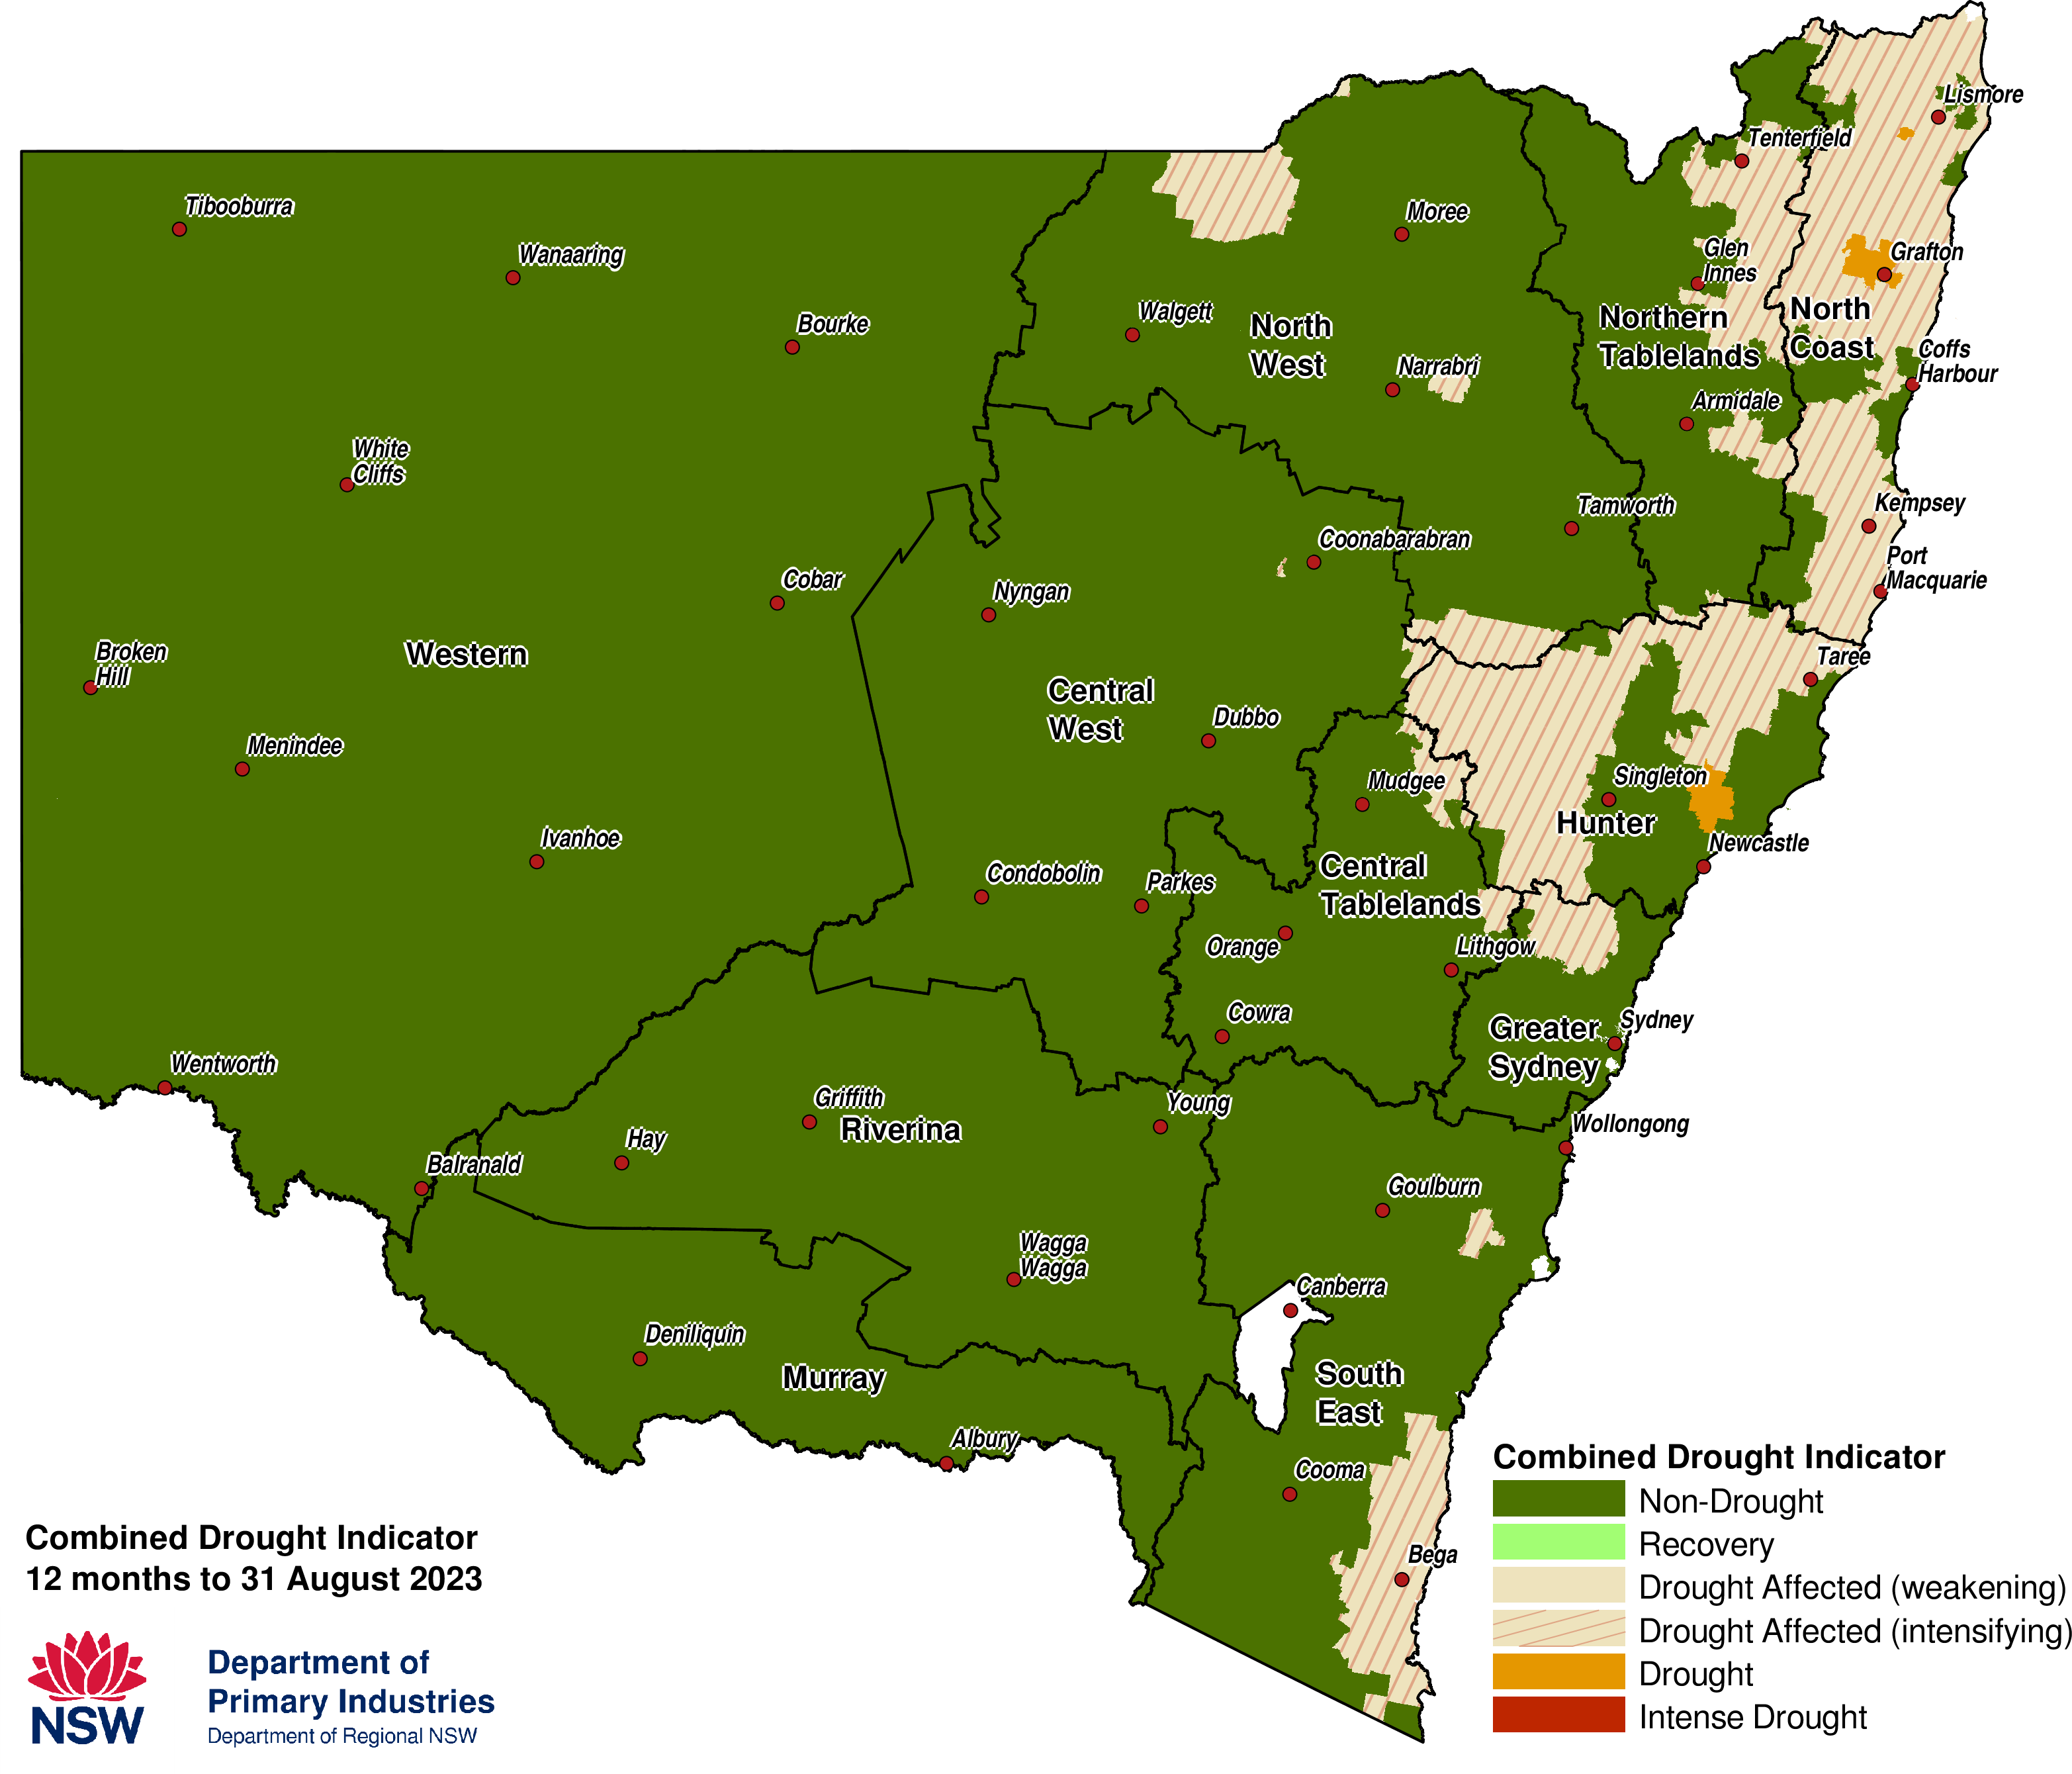 Figure 1. Verified NSW Combined Drought Indicator to 31 August 2023